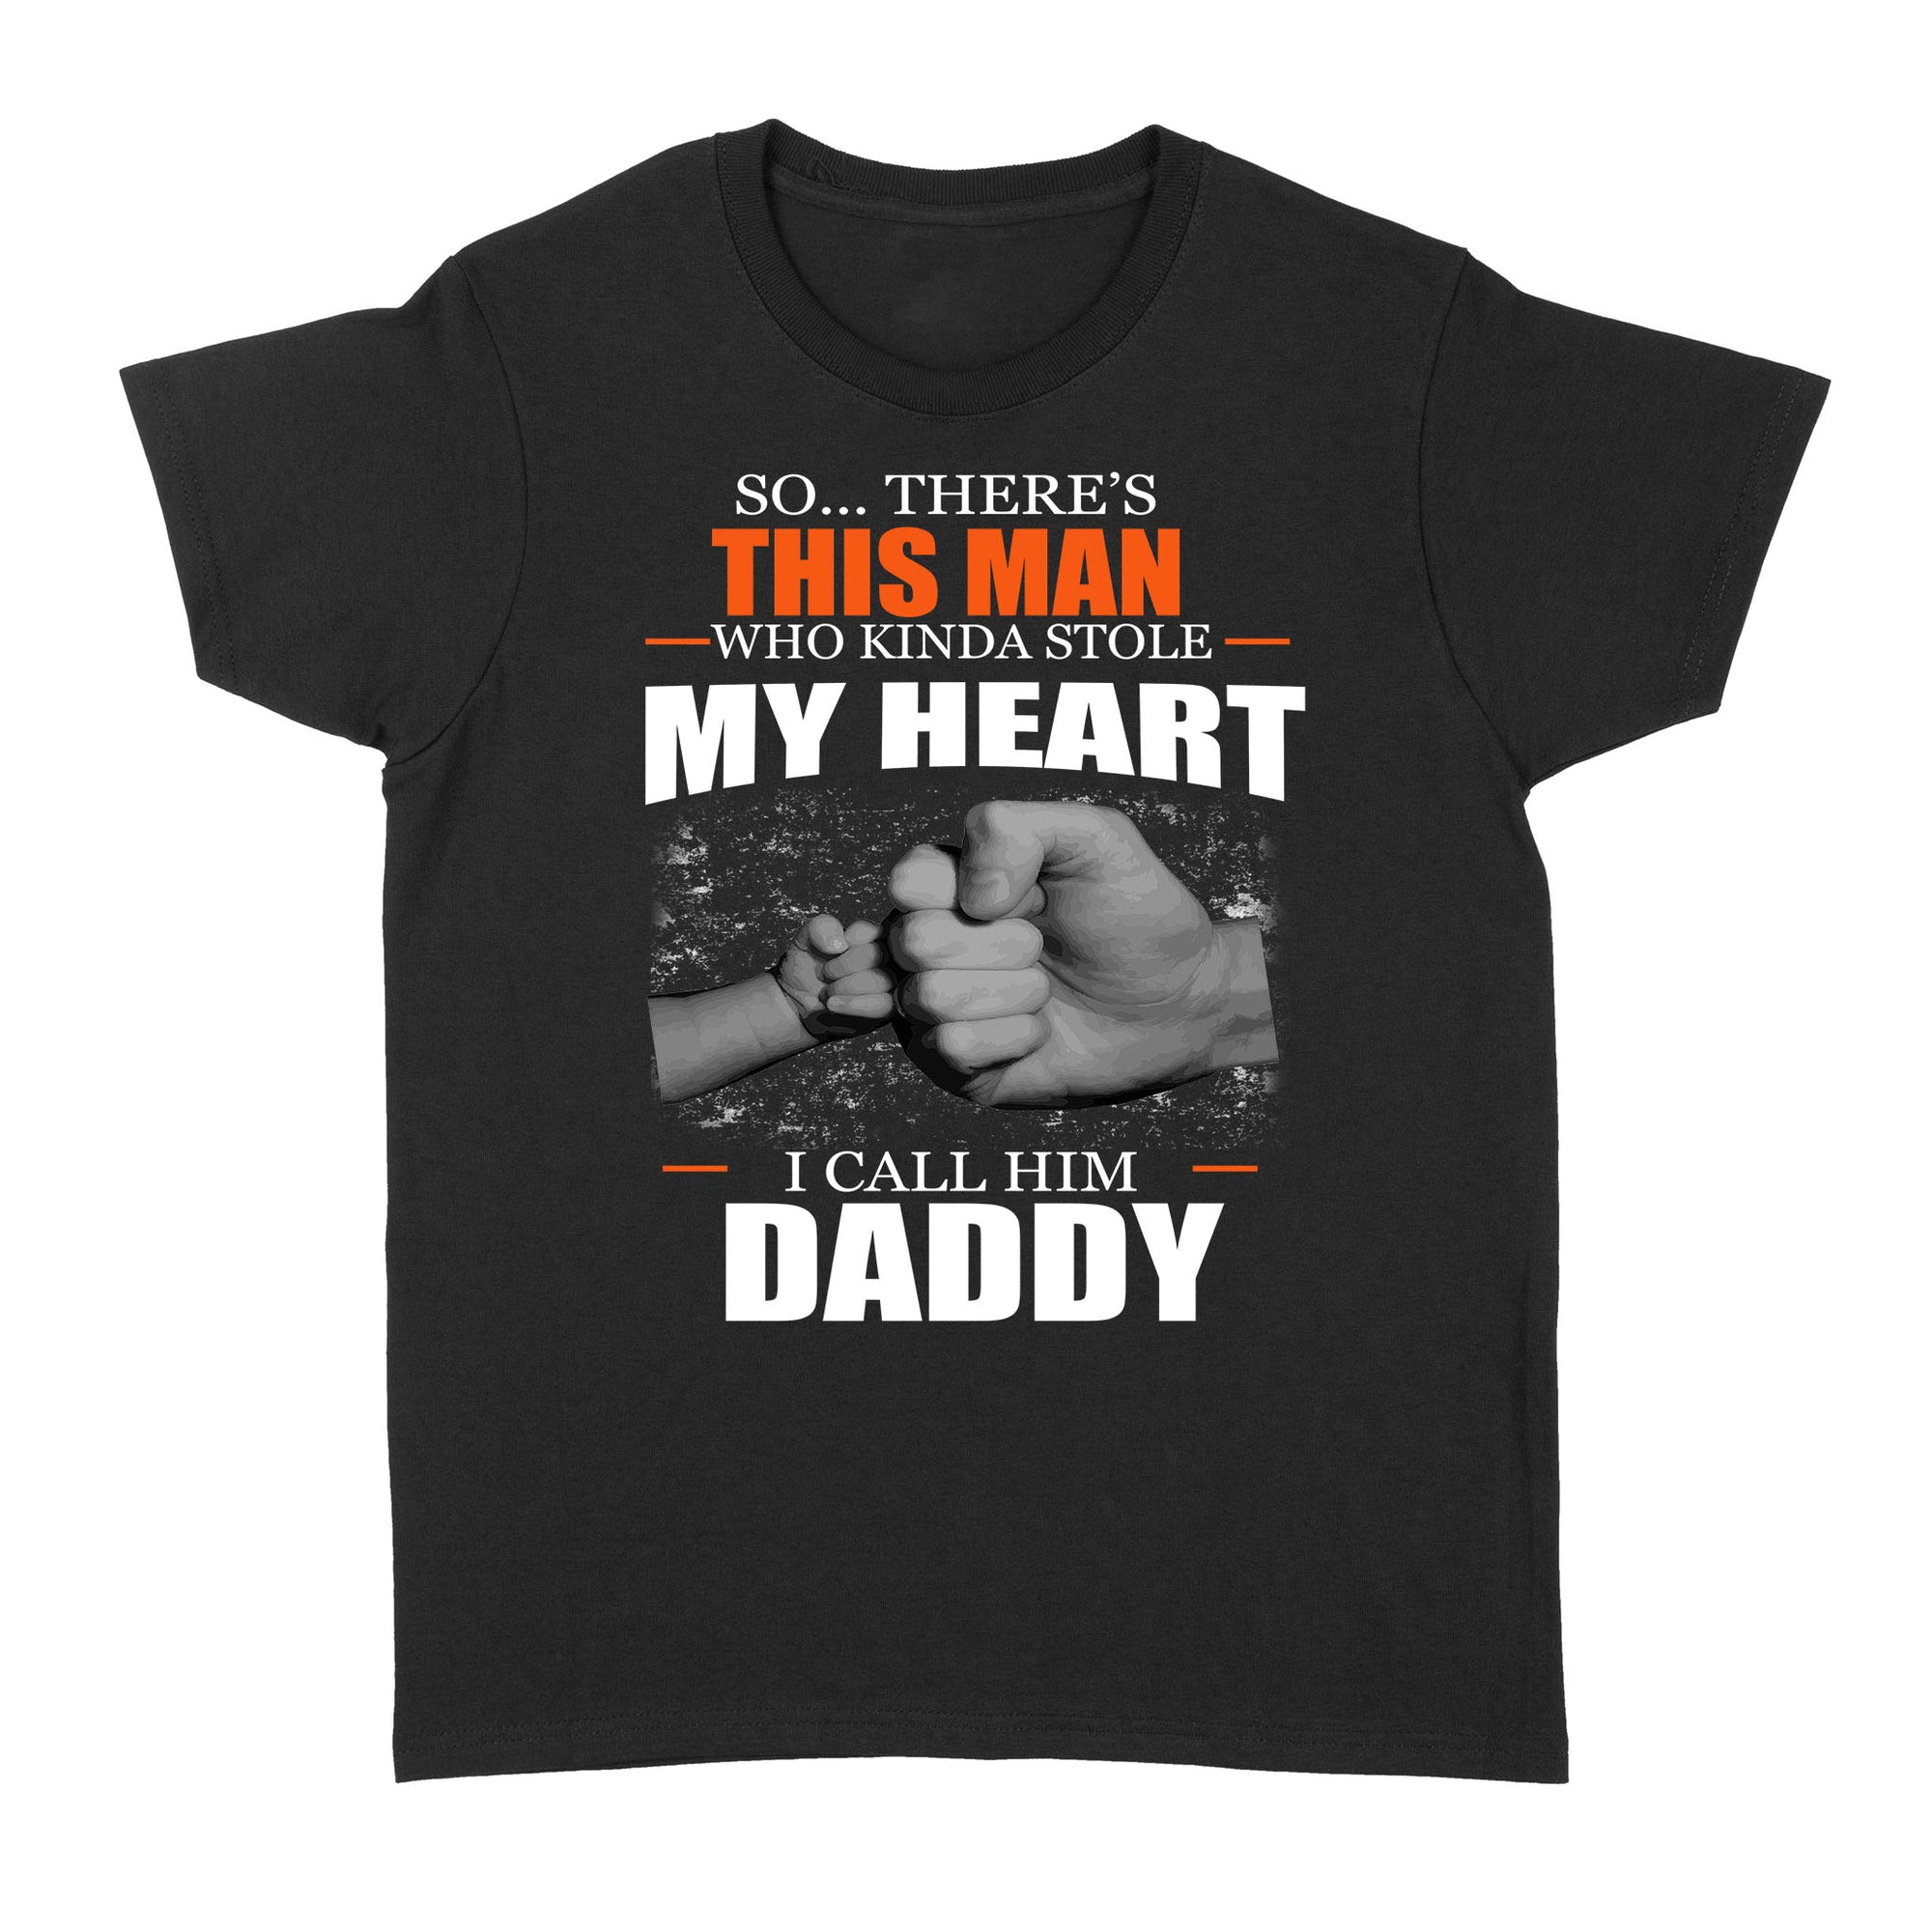 Gift Ideas for Daughter So There's This Man Who Kinda Stole My Heart I Call Him Daddy TL - Standard Women's T-shirt